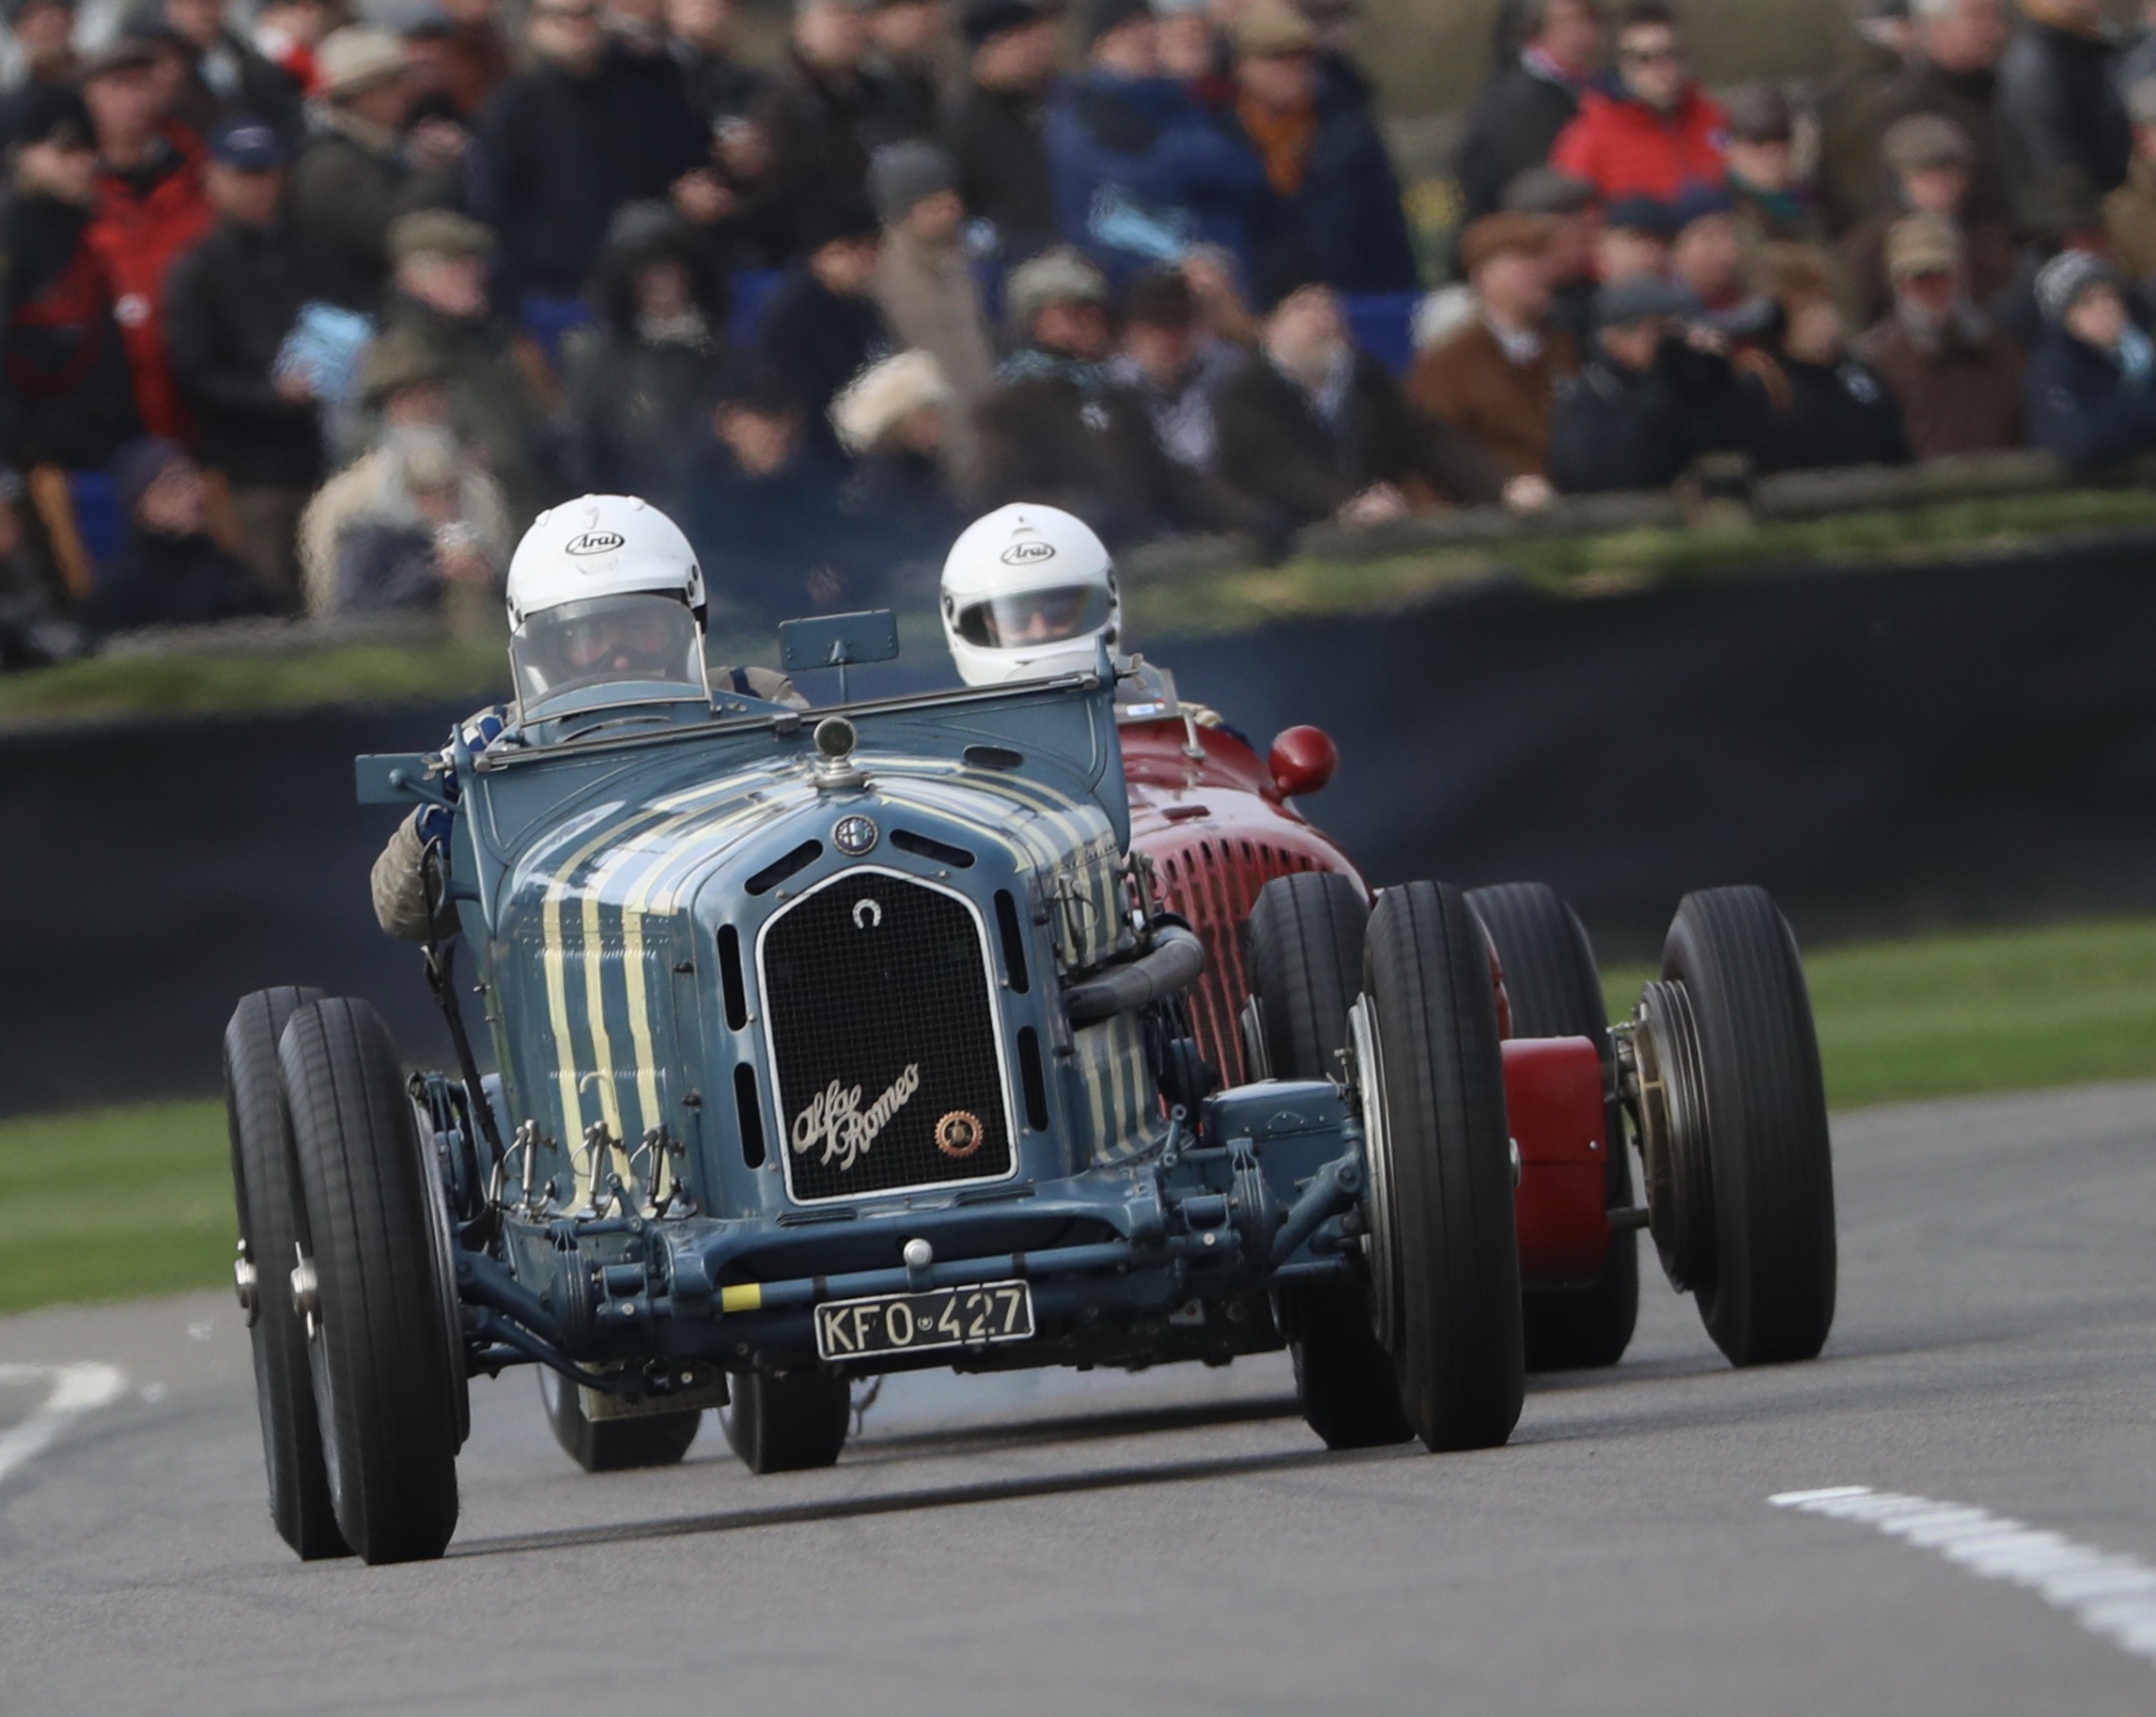 The Alfa Romeo 8C Monza of Derek Hood completed its first race with JD Classics without fault.